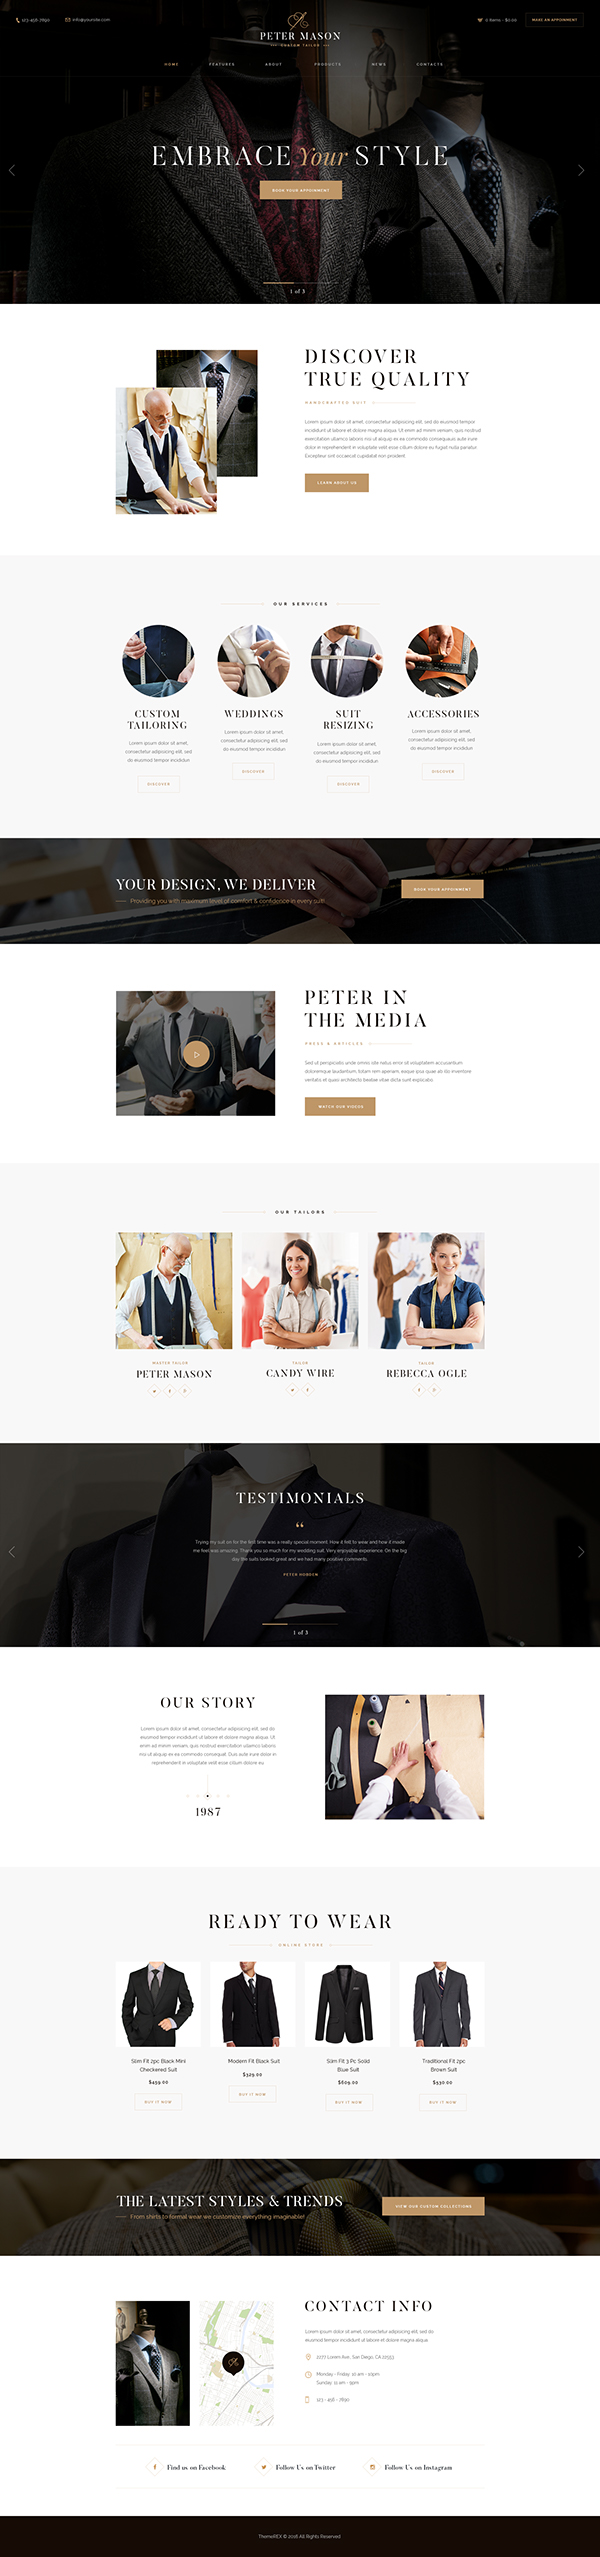 Peter Mason | Custom Tailoring and Clothing Store